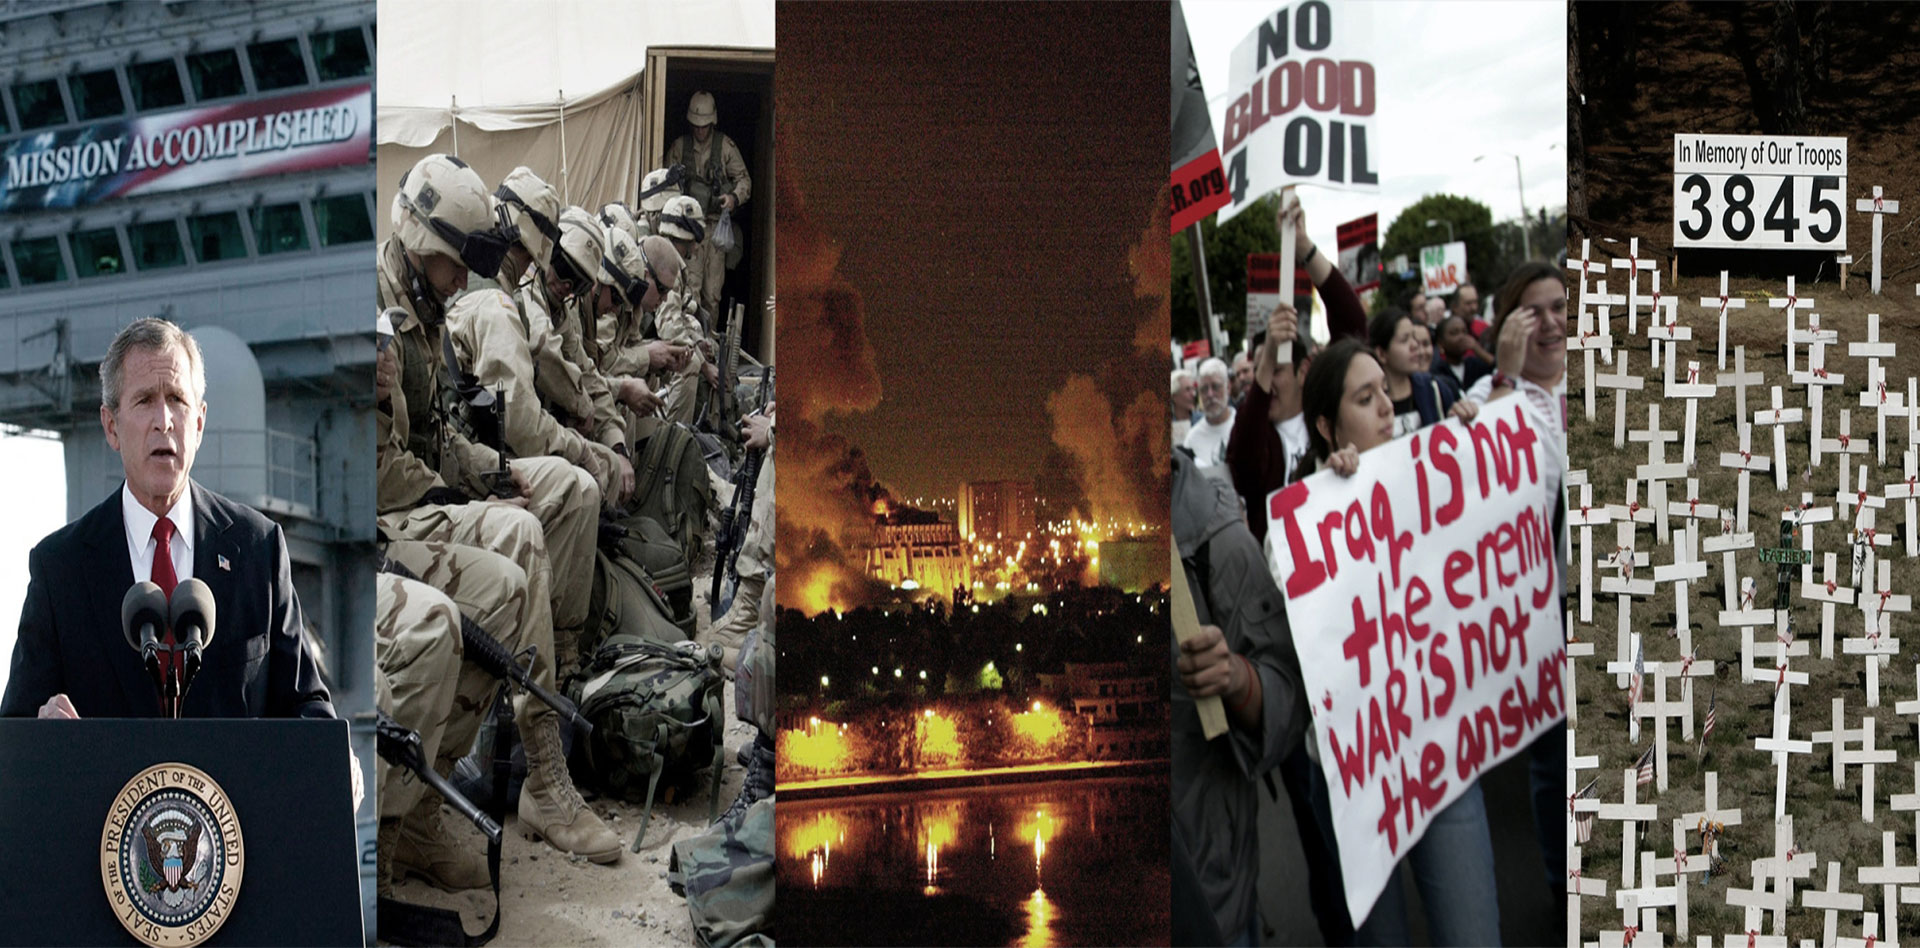 From Conflict to Recovery: The Iraq War's Legacy 20 Years Later...